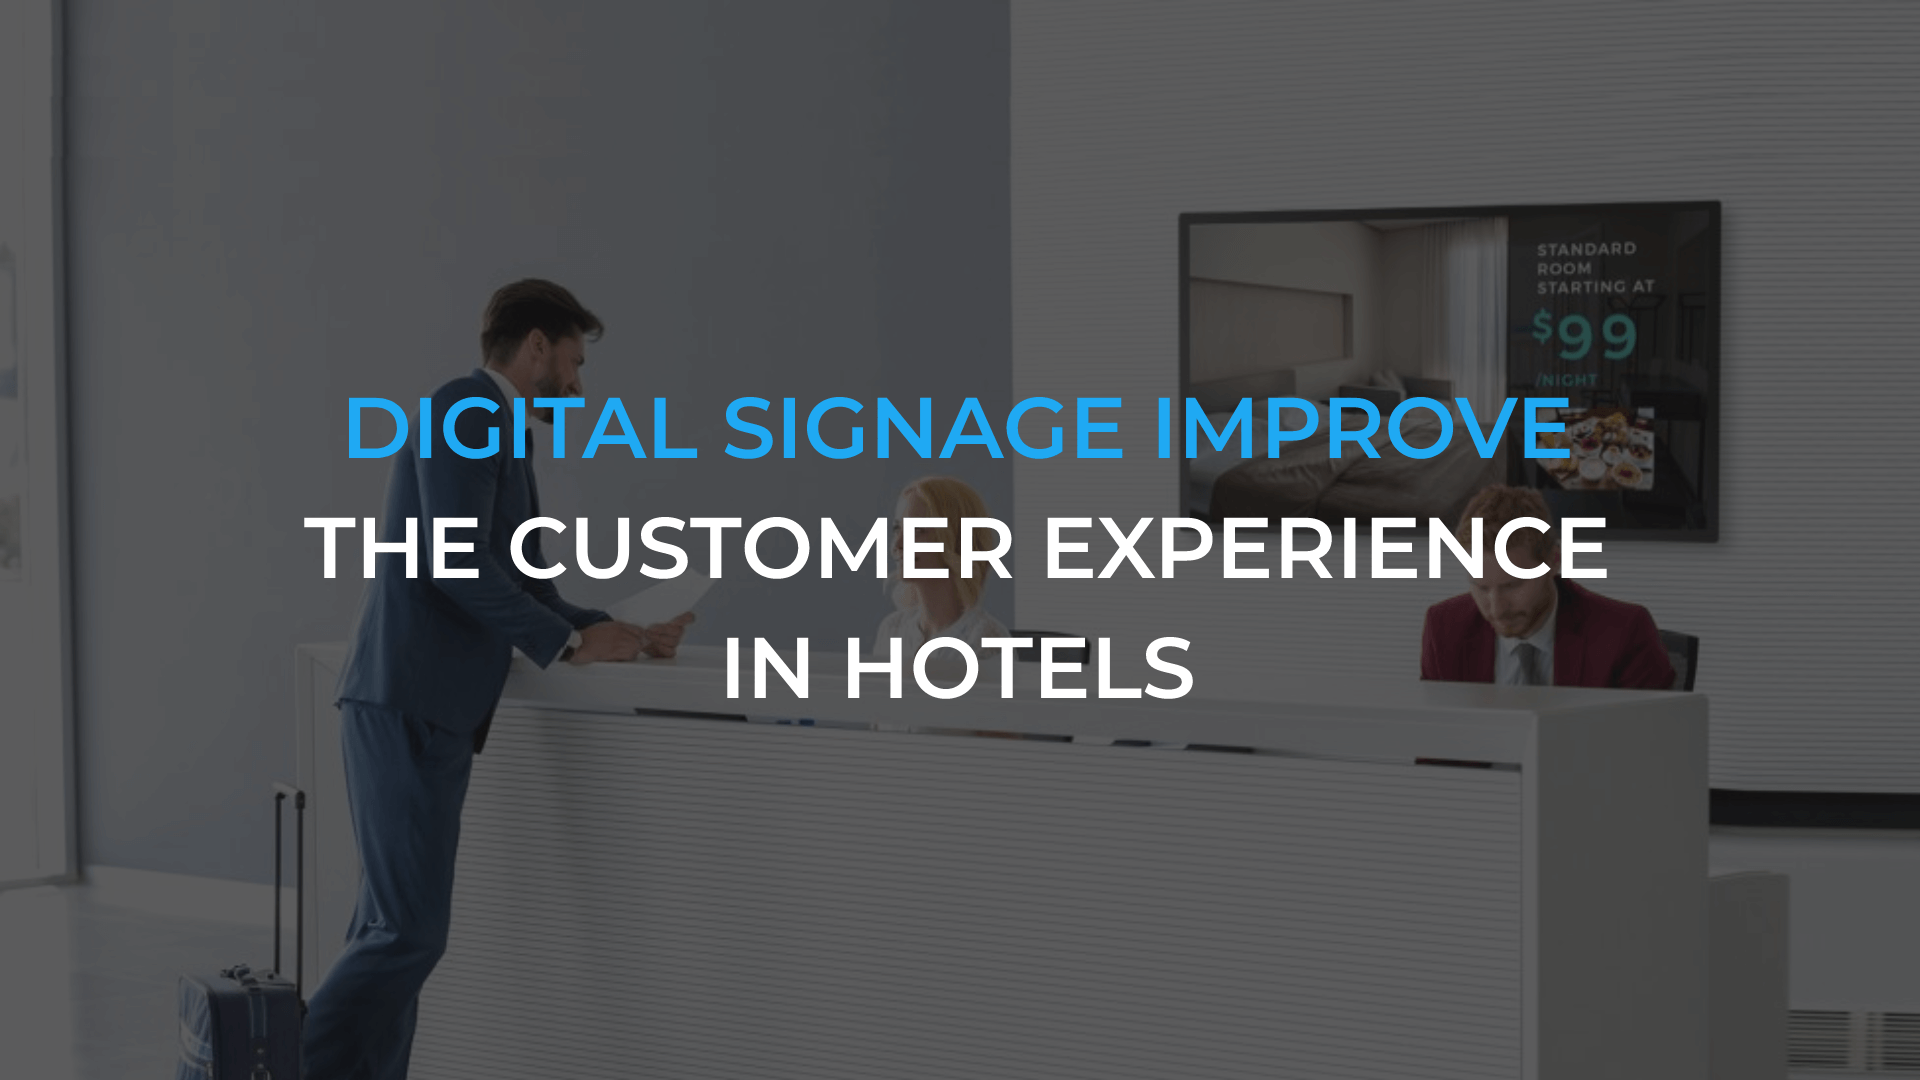 How can digital signage improve the customer experience in hotels?